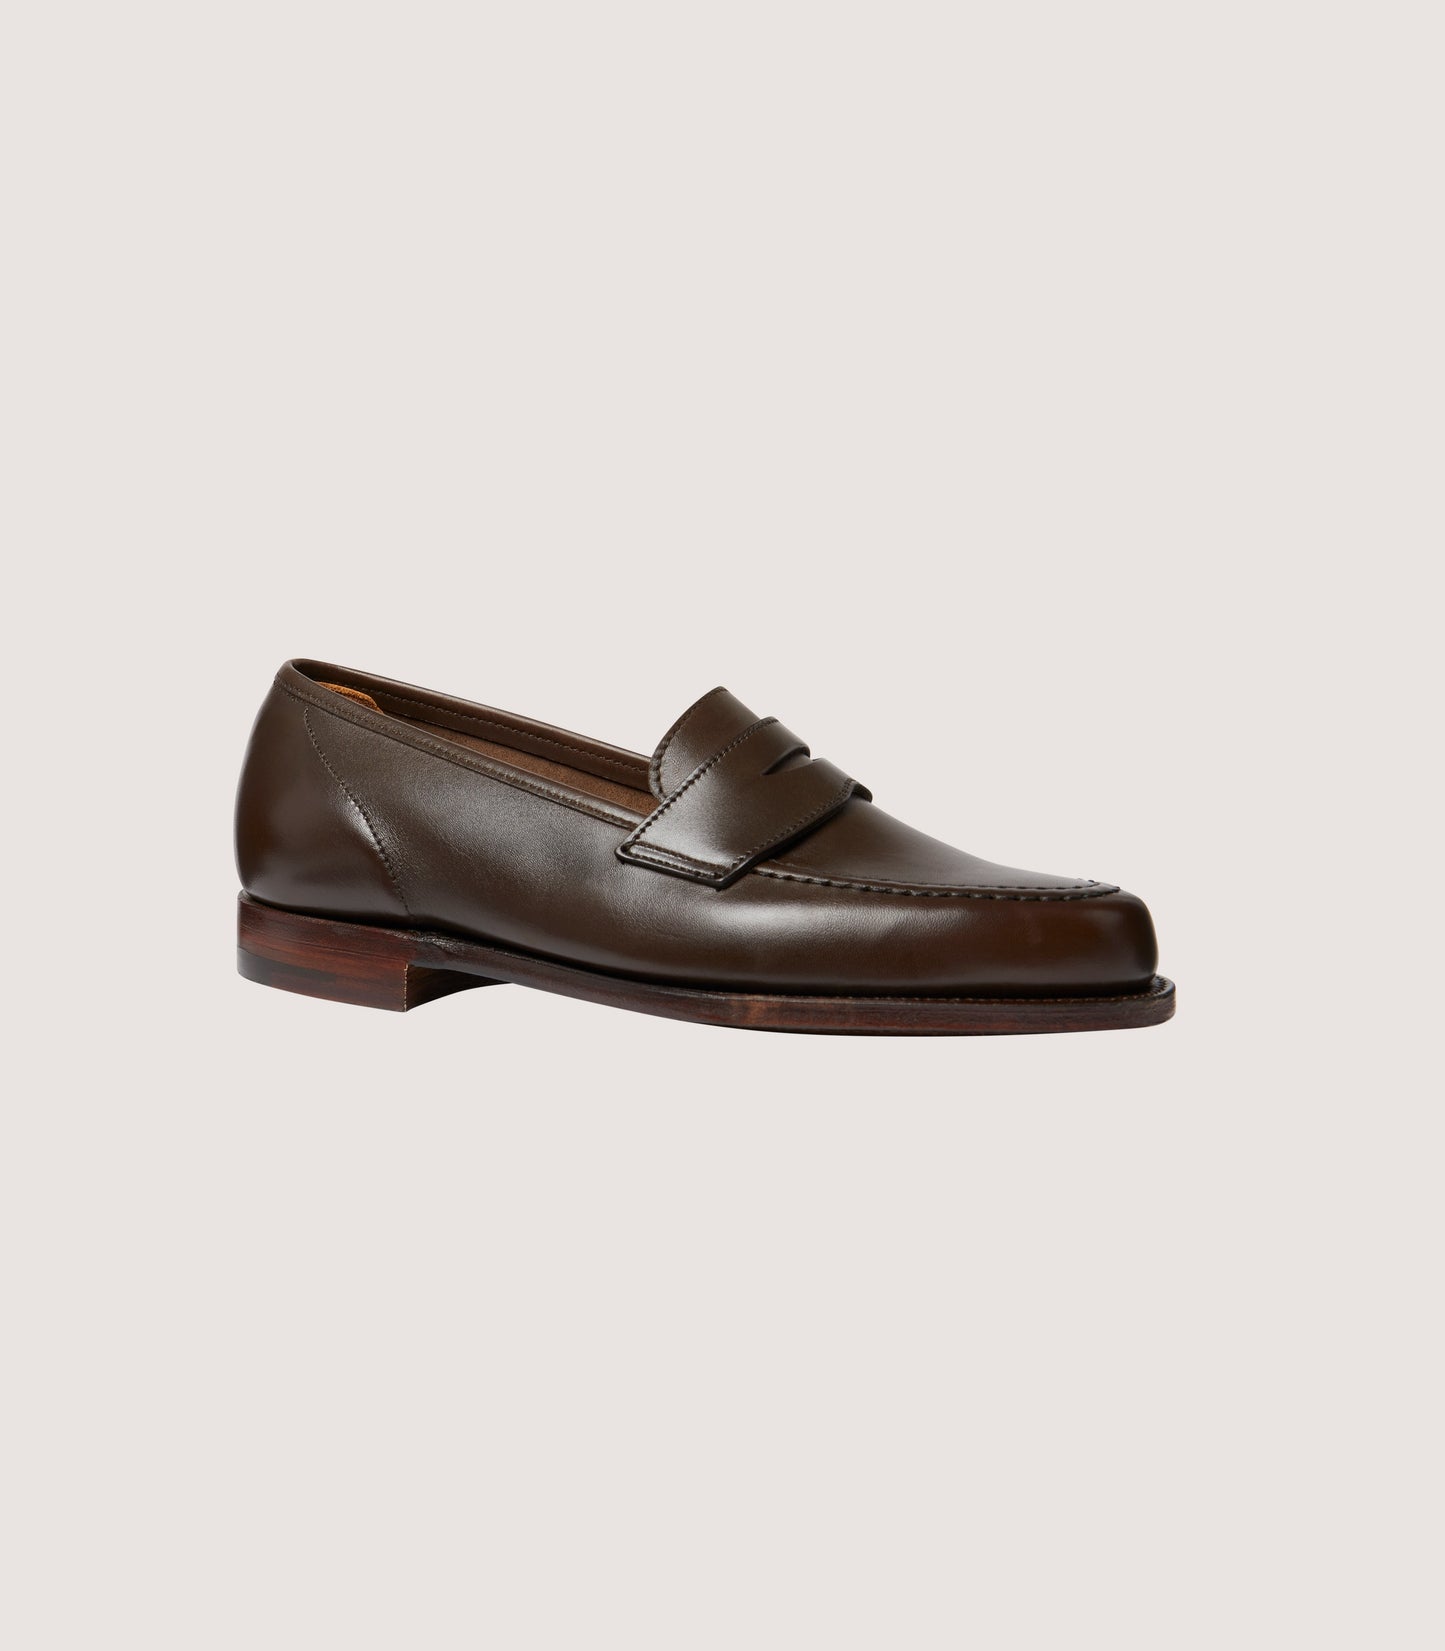 Women's Unlined Waxed Penny Loafers With Superflex Leather Sole